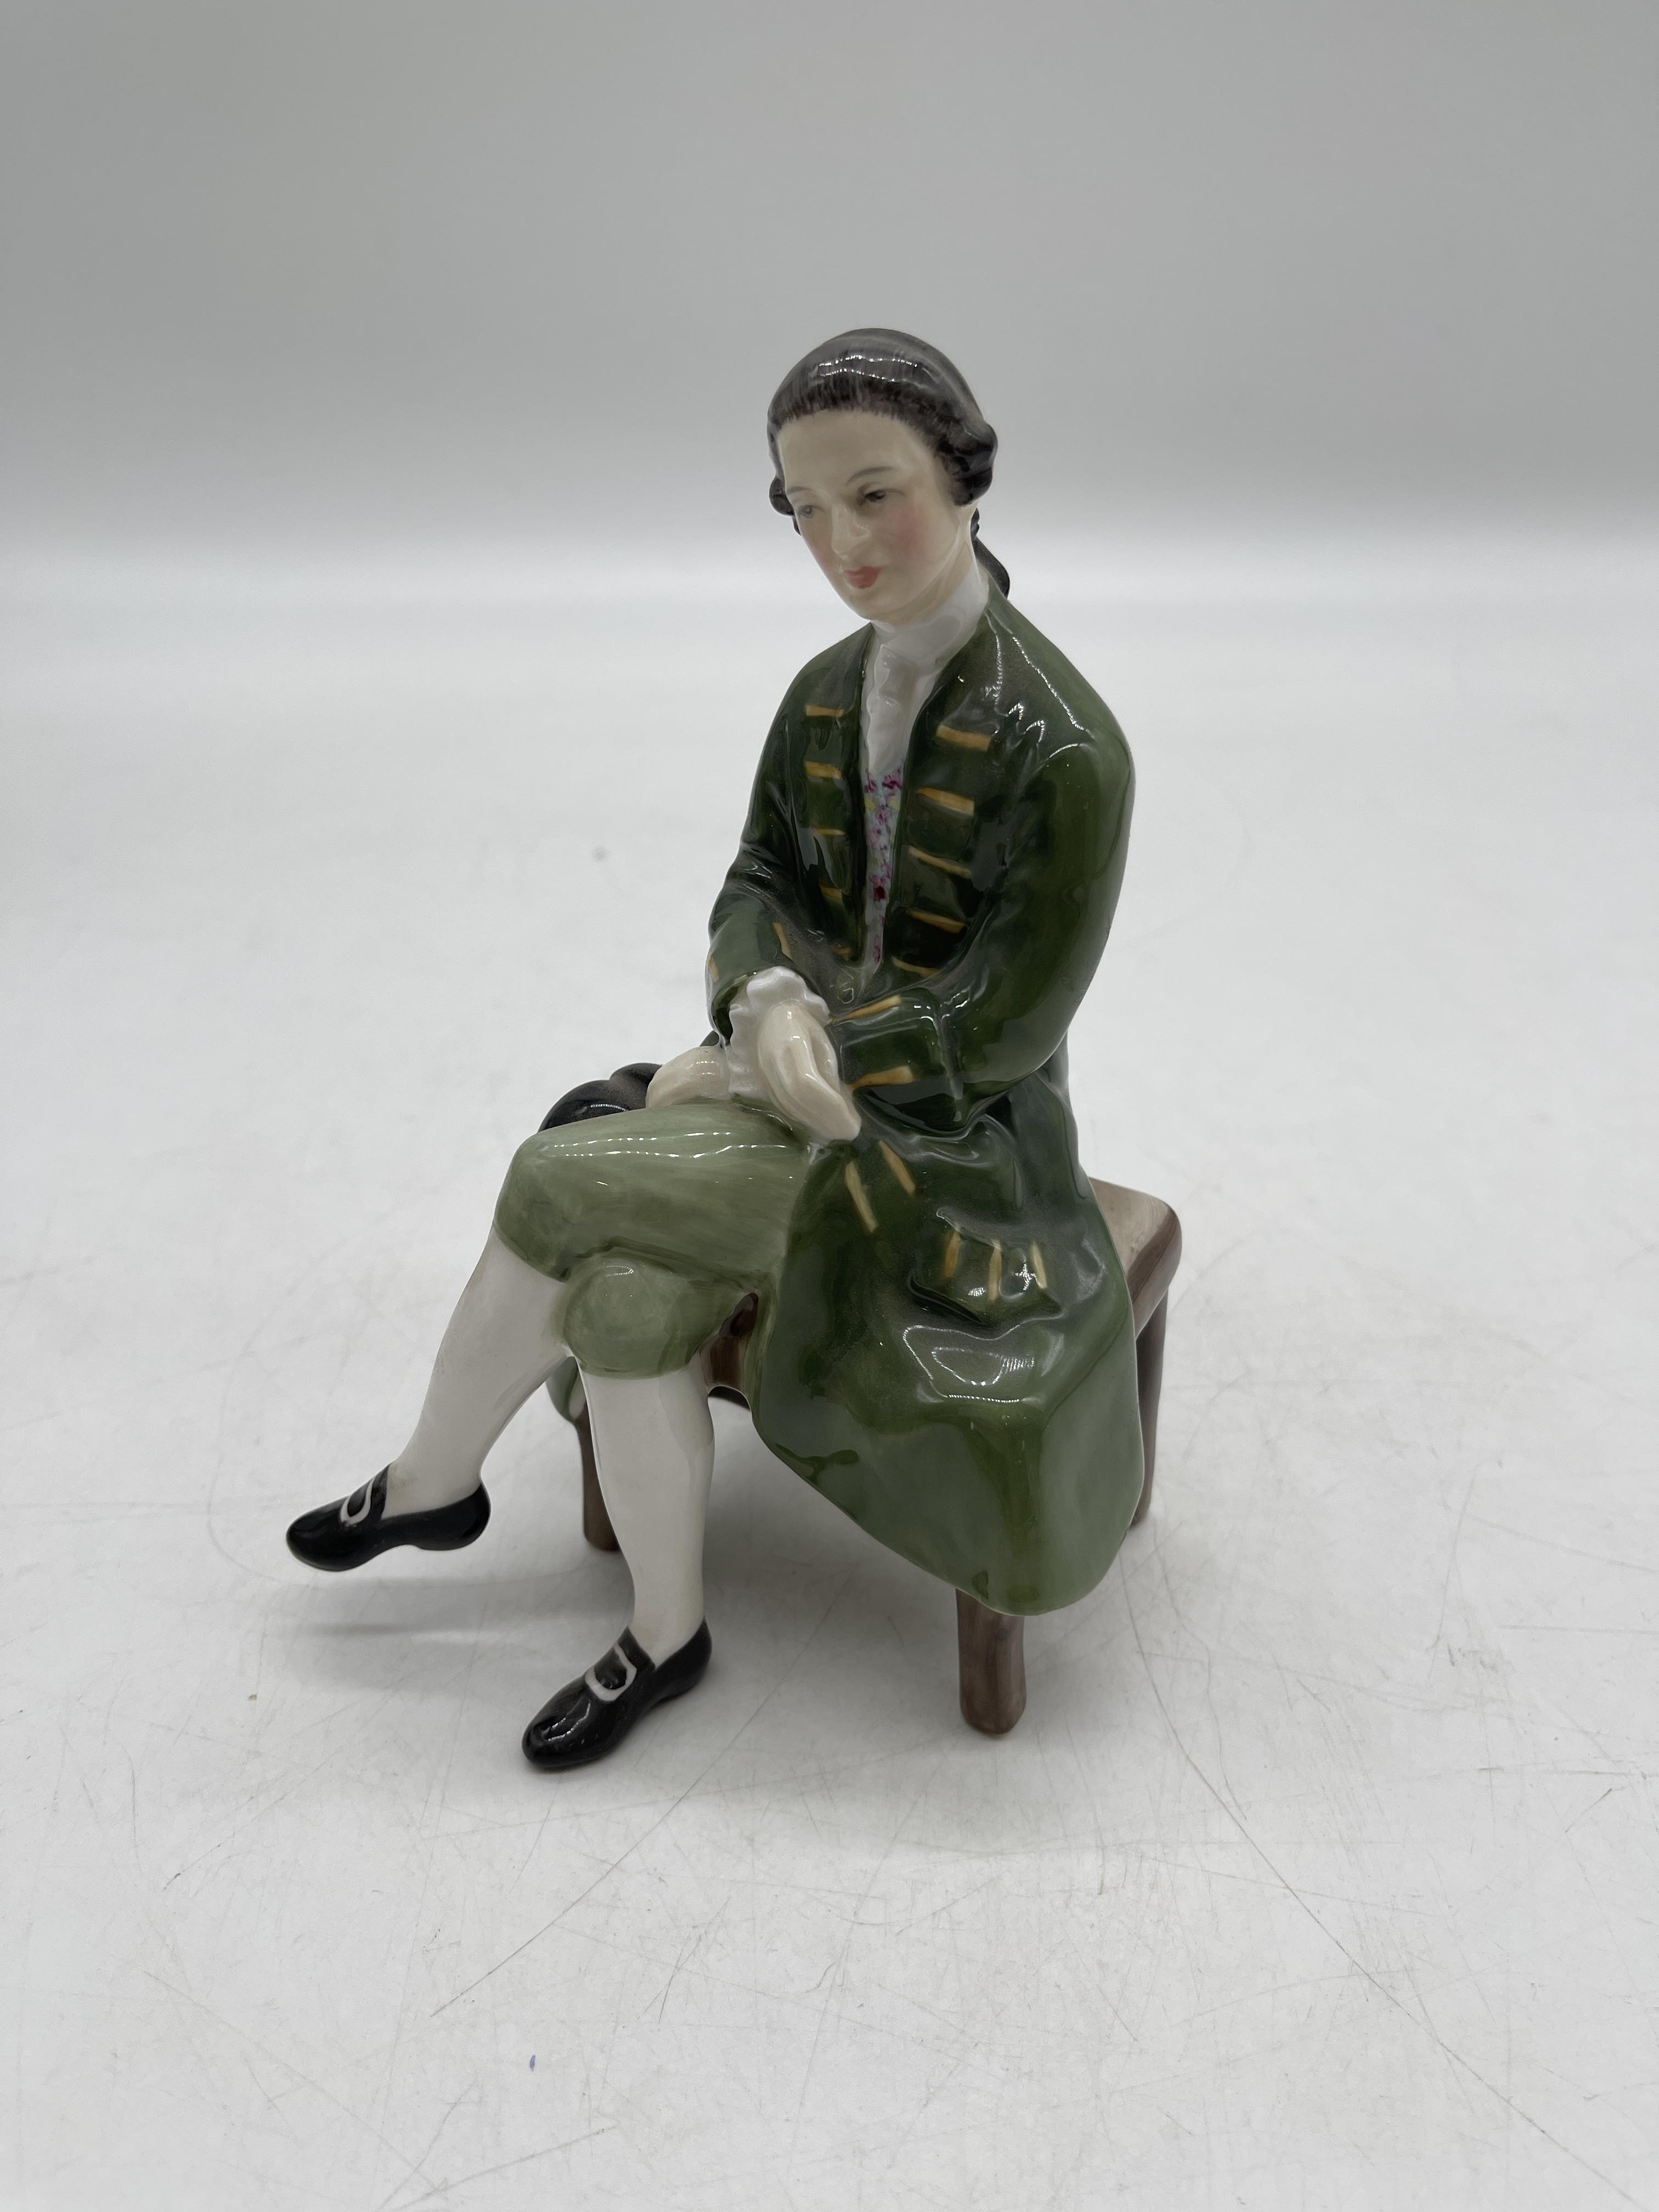 Green Royal Doulton ceramic figurines - Image 15 of 41